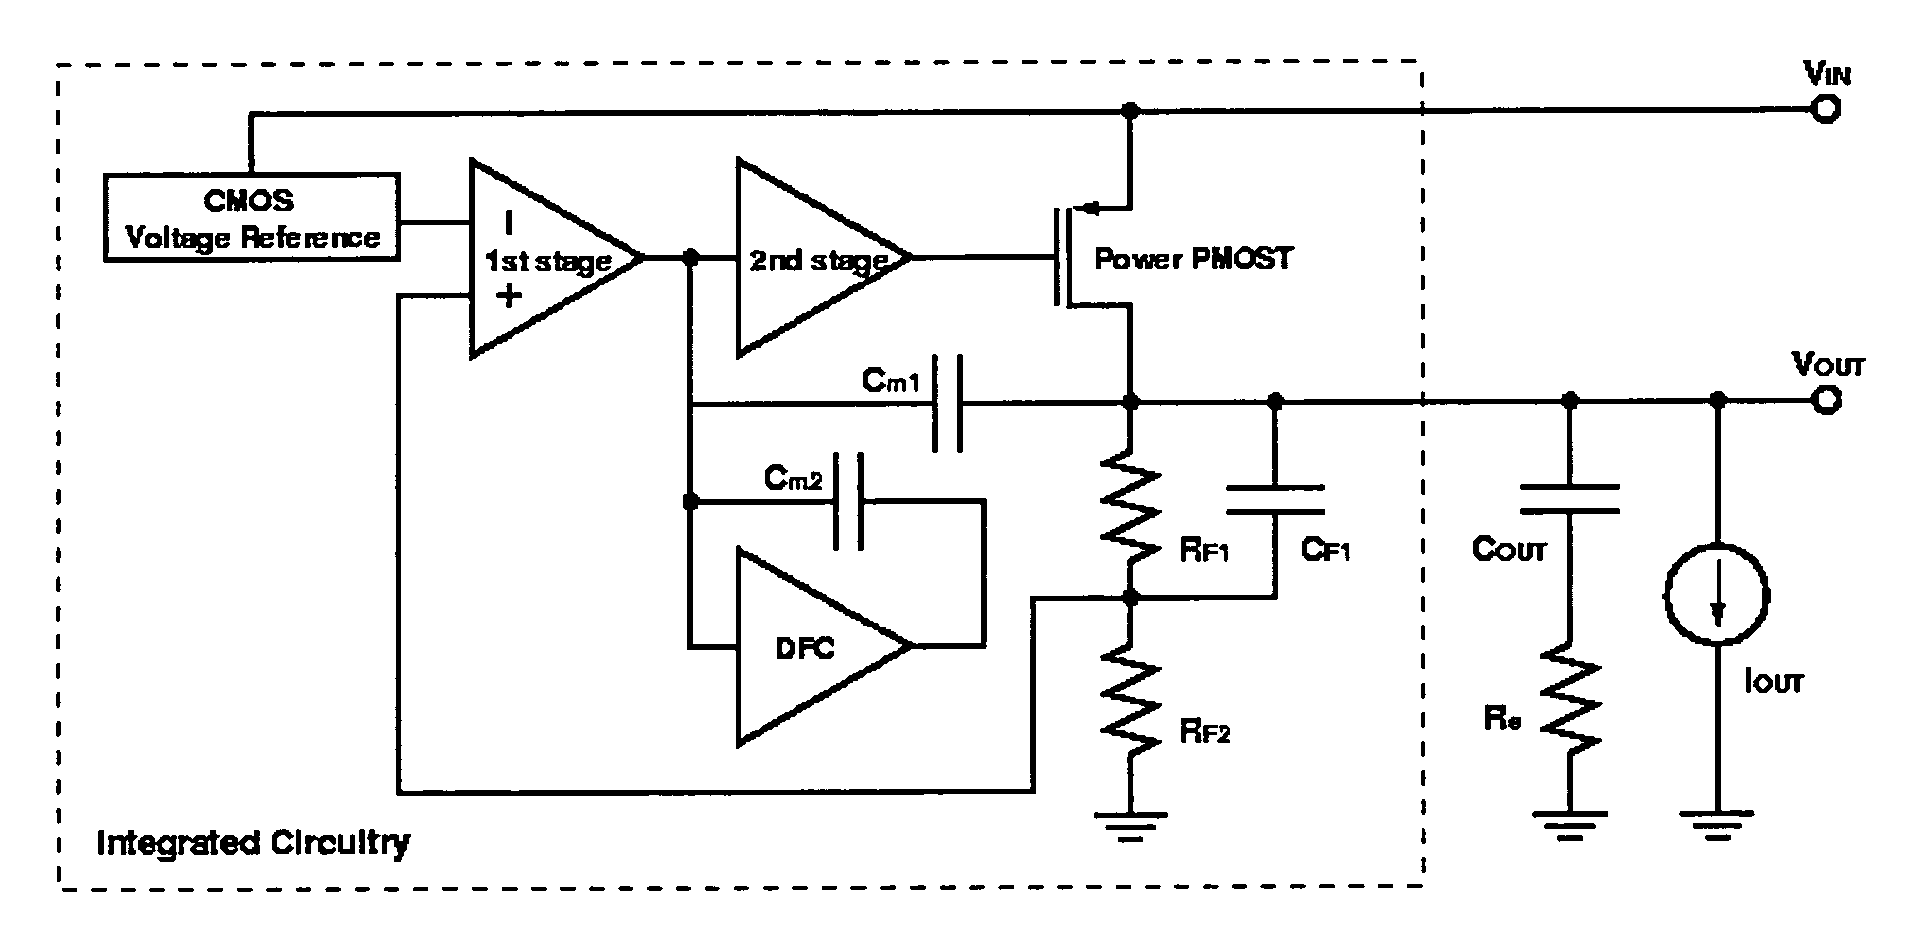 Low dropout regulator capable of on-chip implementation